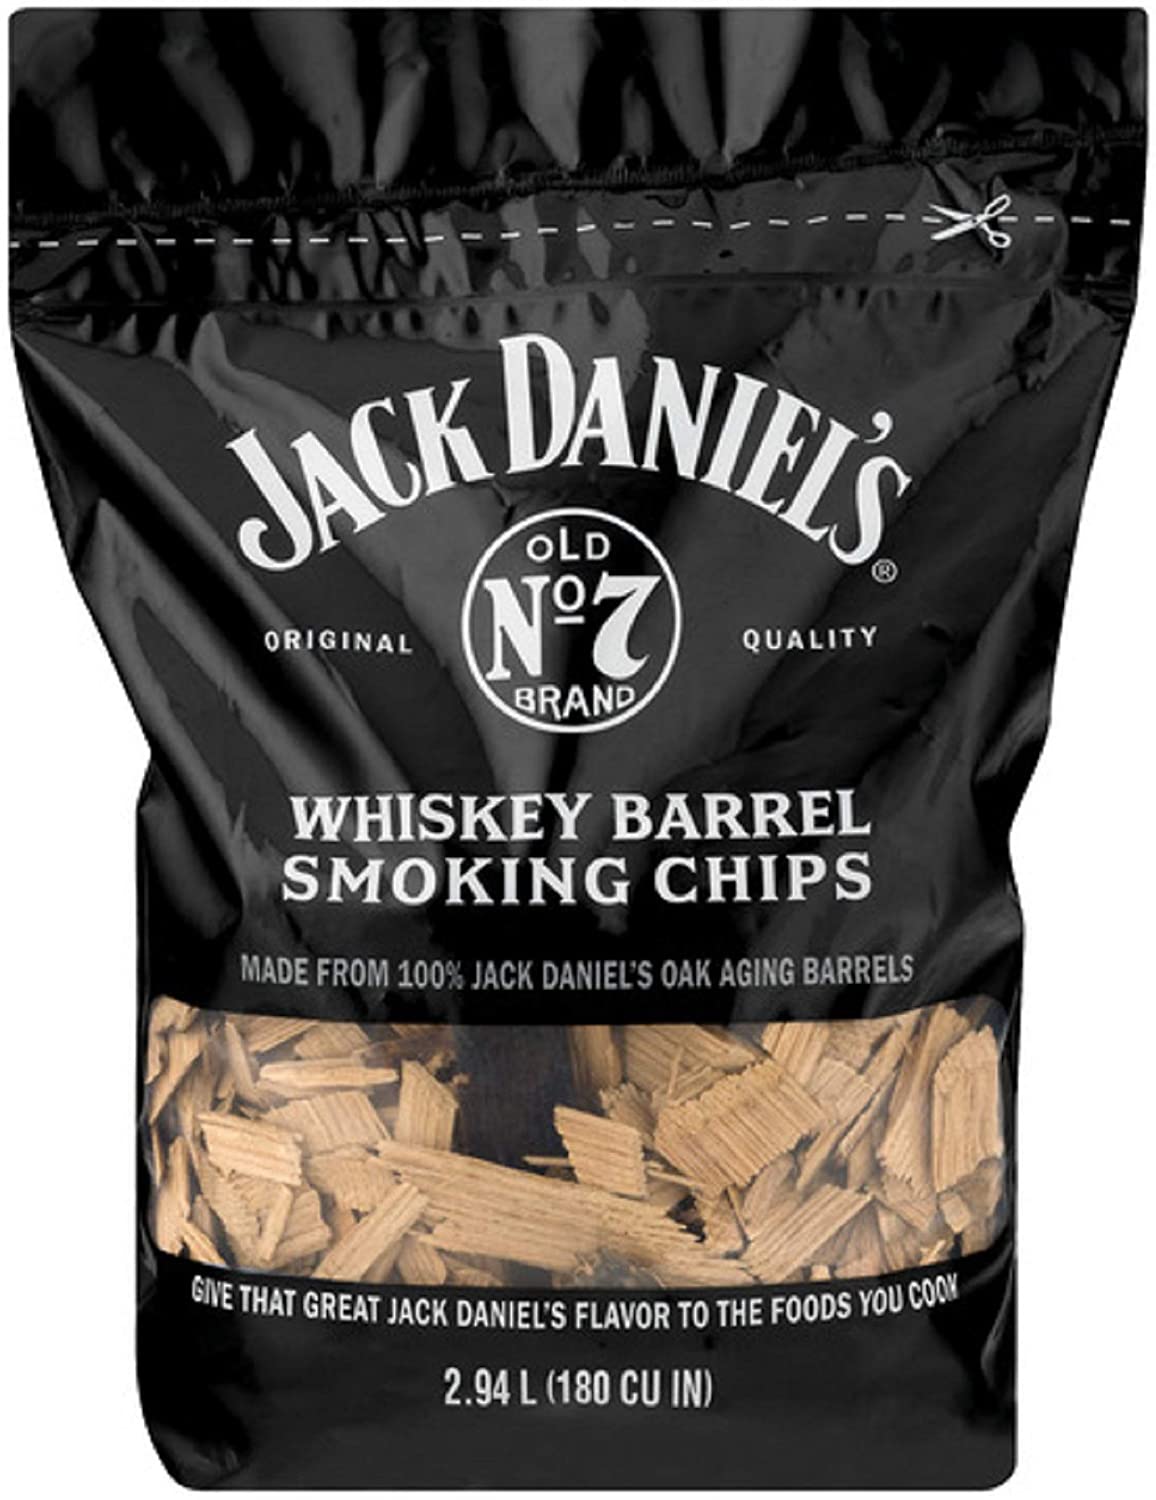 Jack Daniel's Tennessee Whiskey Barrel Smoking Chips